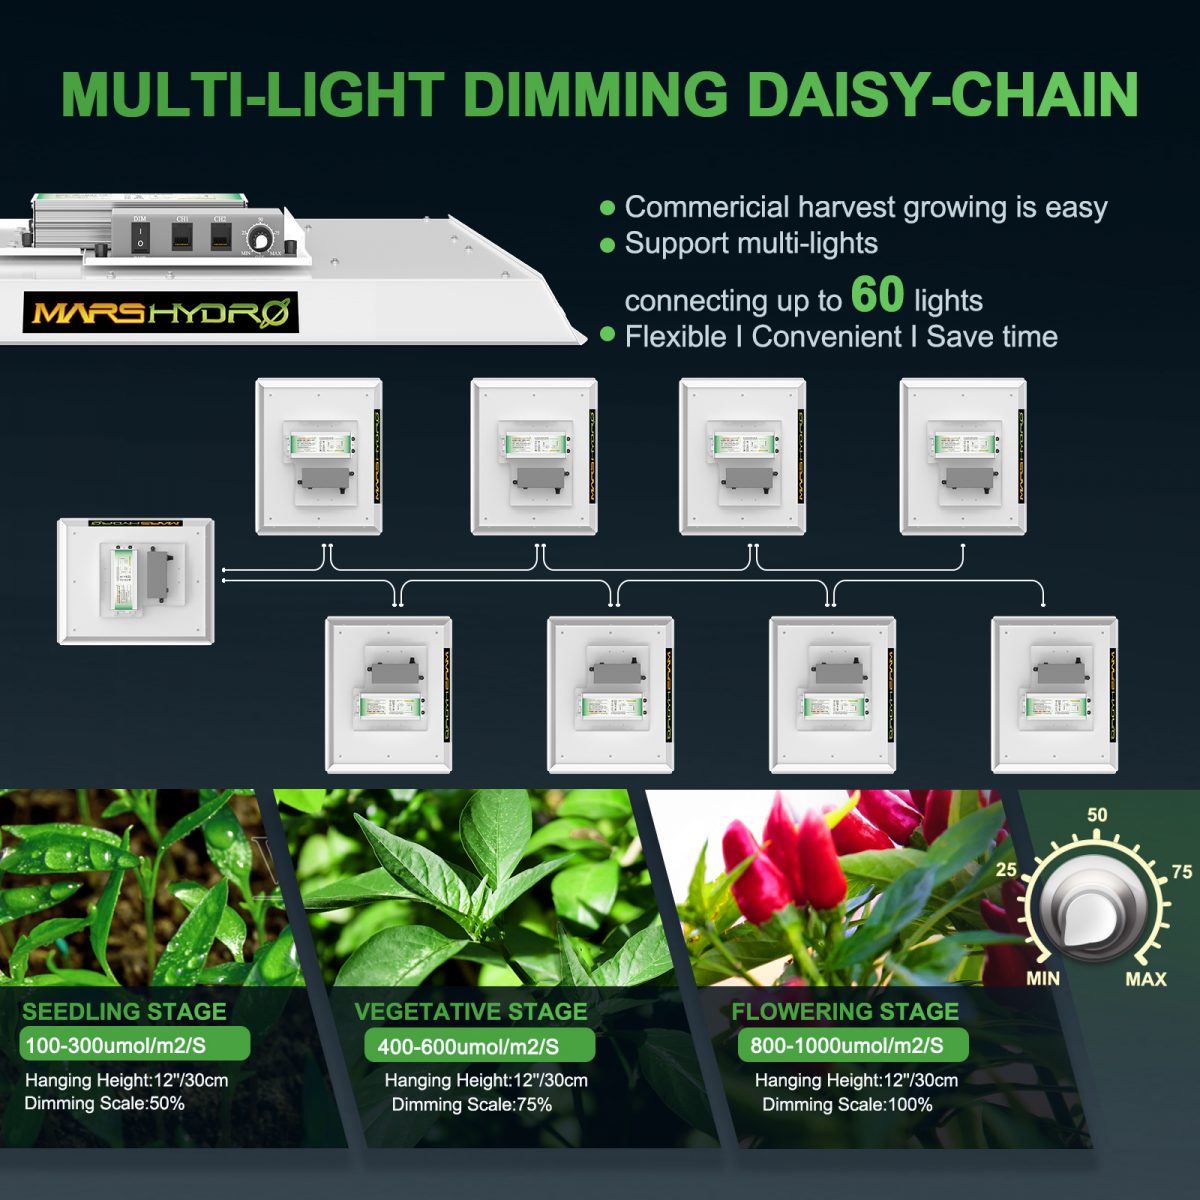 Daisy Chain Dimming Feature: With an independent dimming button on the external power supply, and 0-100% brightness settings adaptation, the Mars Hydro TS1000 provides different light levels for various plant stages while saving lots of energy. And up to 30 TS1000 LED grow lights can be daisy-chained in a group to be controlled by a master light.